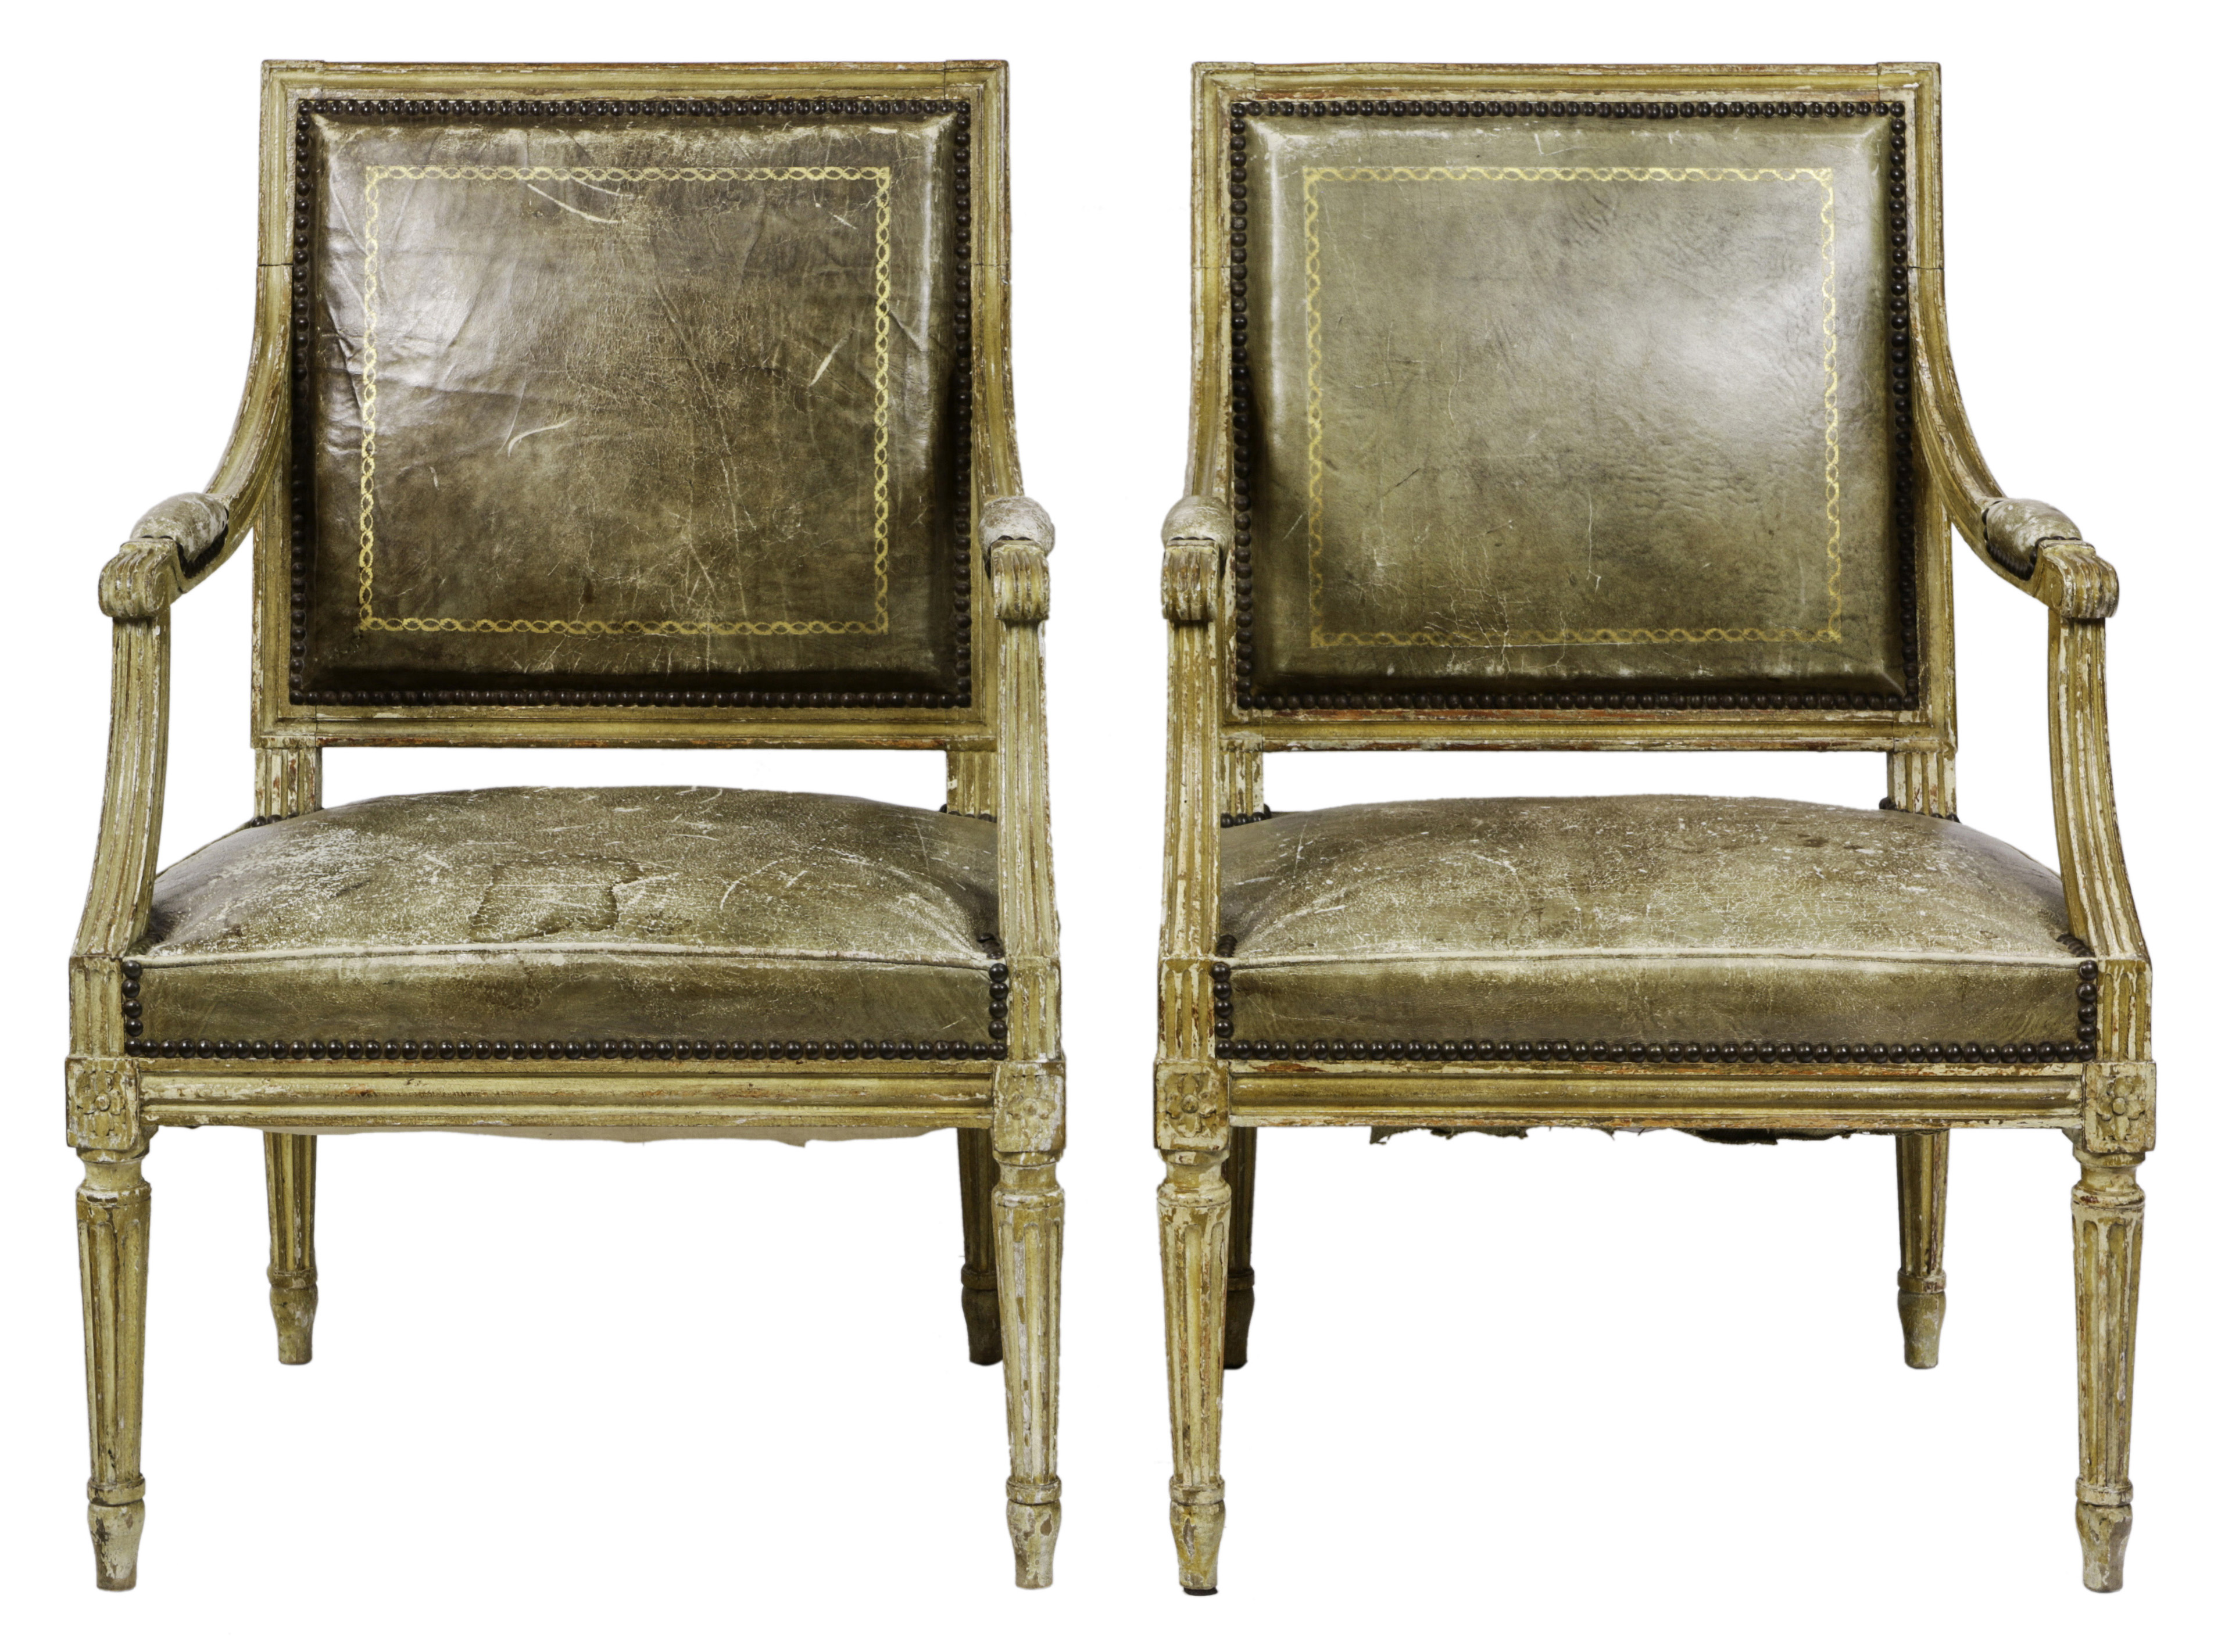 A PAIR OF NEOCLASSICAL STYLE ARMCHAIRS 3a5762